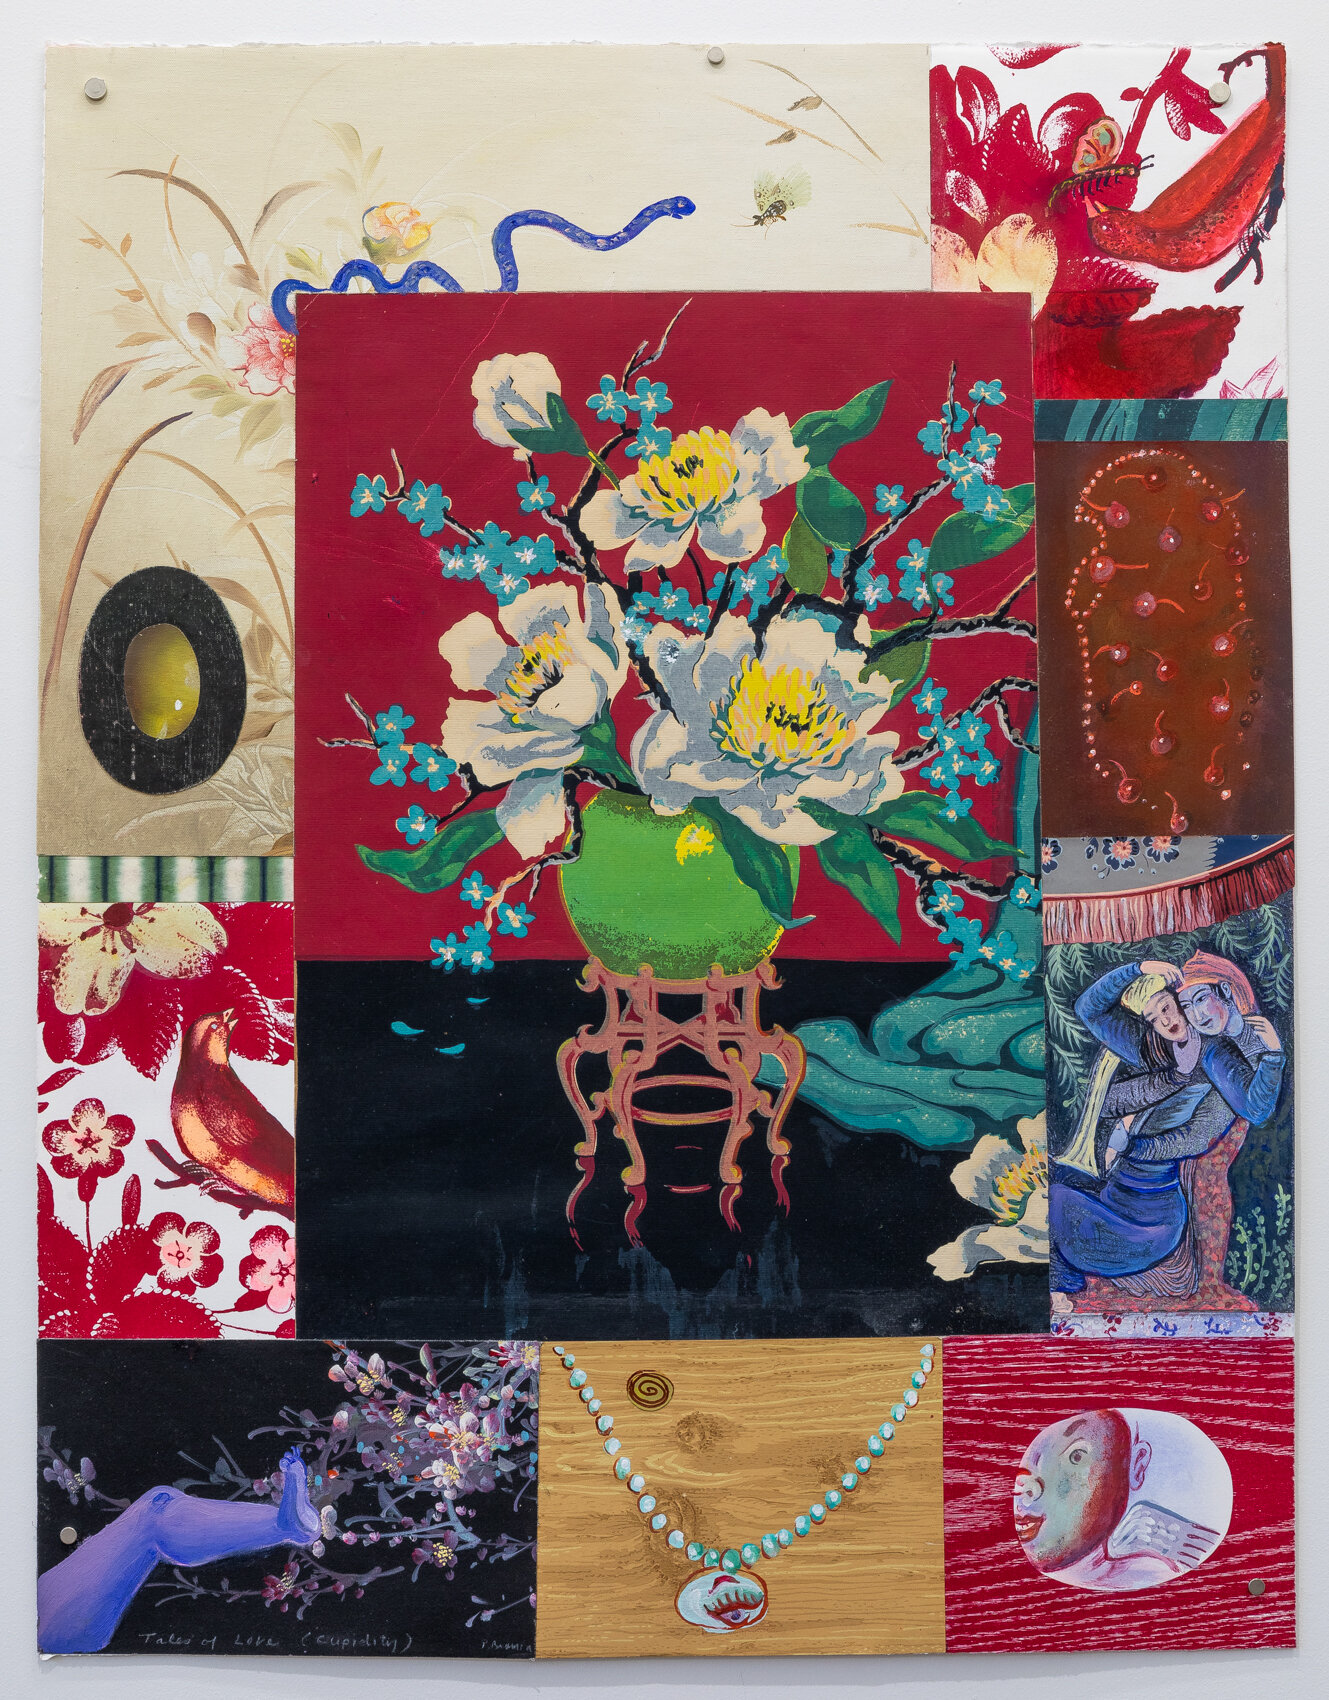 Tales of Love (Cupidity), 36 x 28", monoprint and collage, 1995